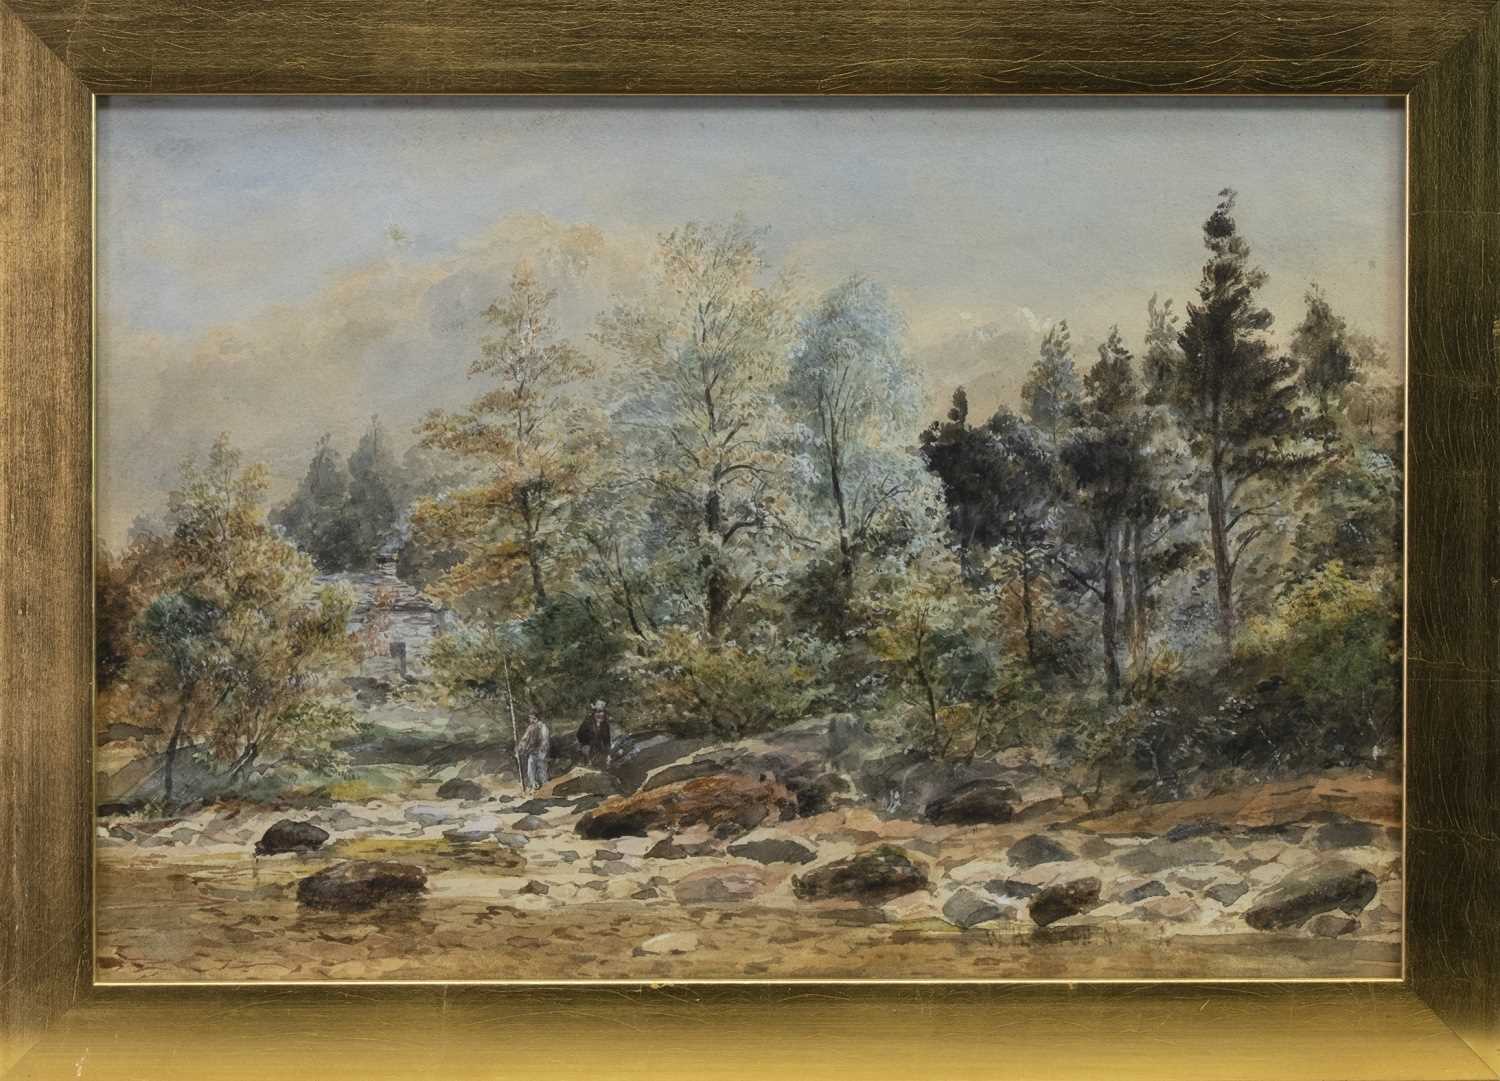 Lot 131 - FISHING AT PITLOCHRY, A WATERCOLOUR BY WALLER HUGH PATON